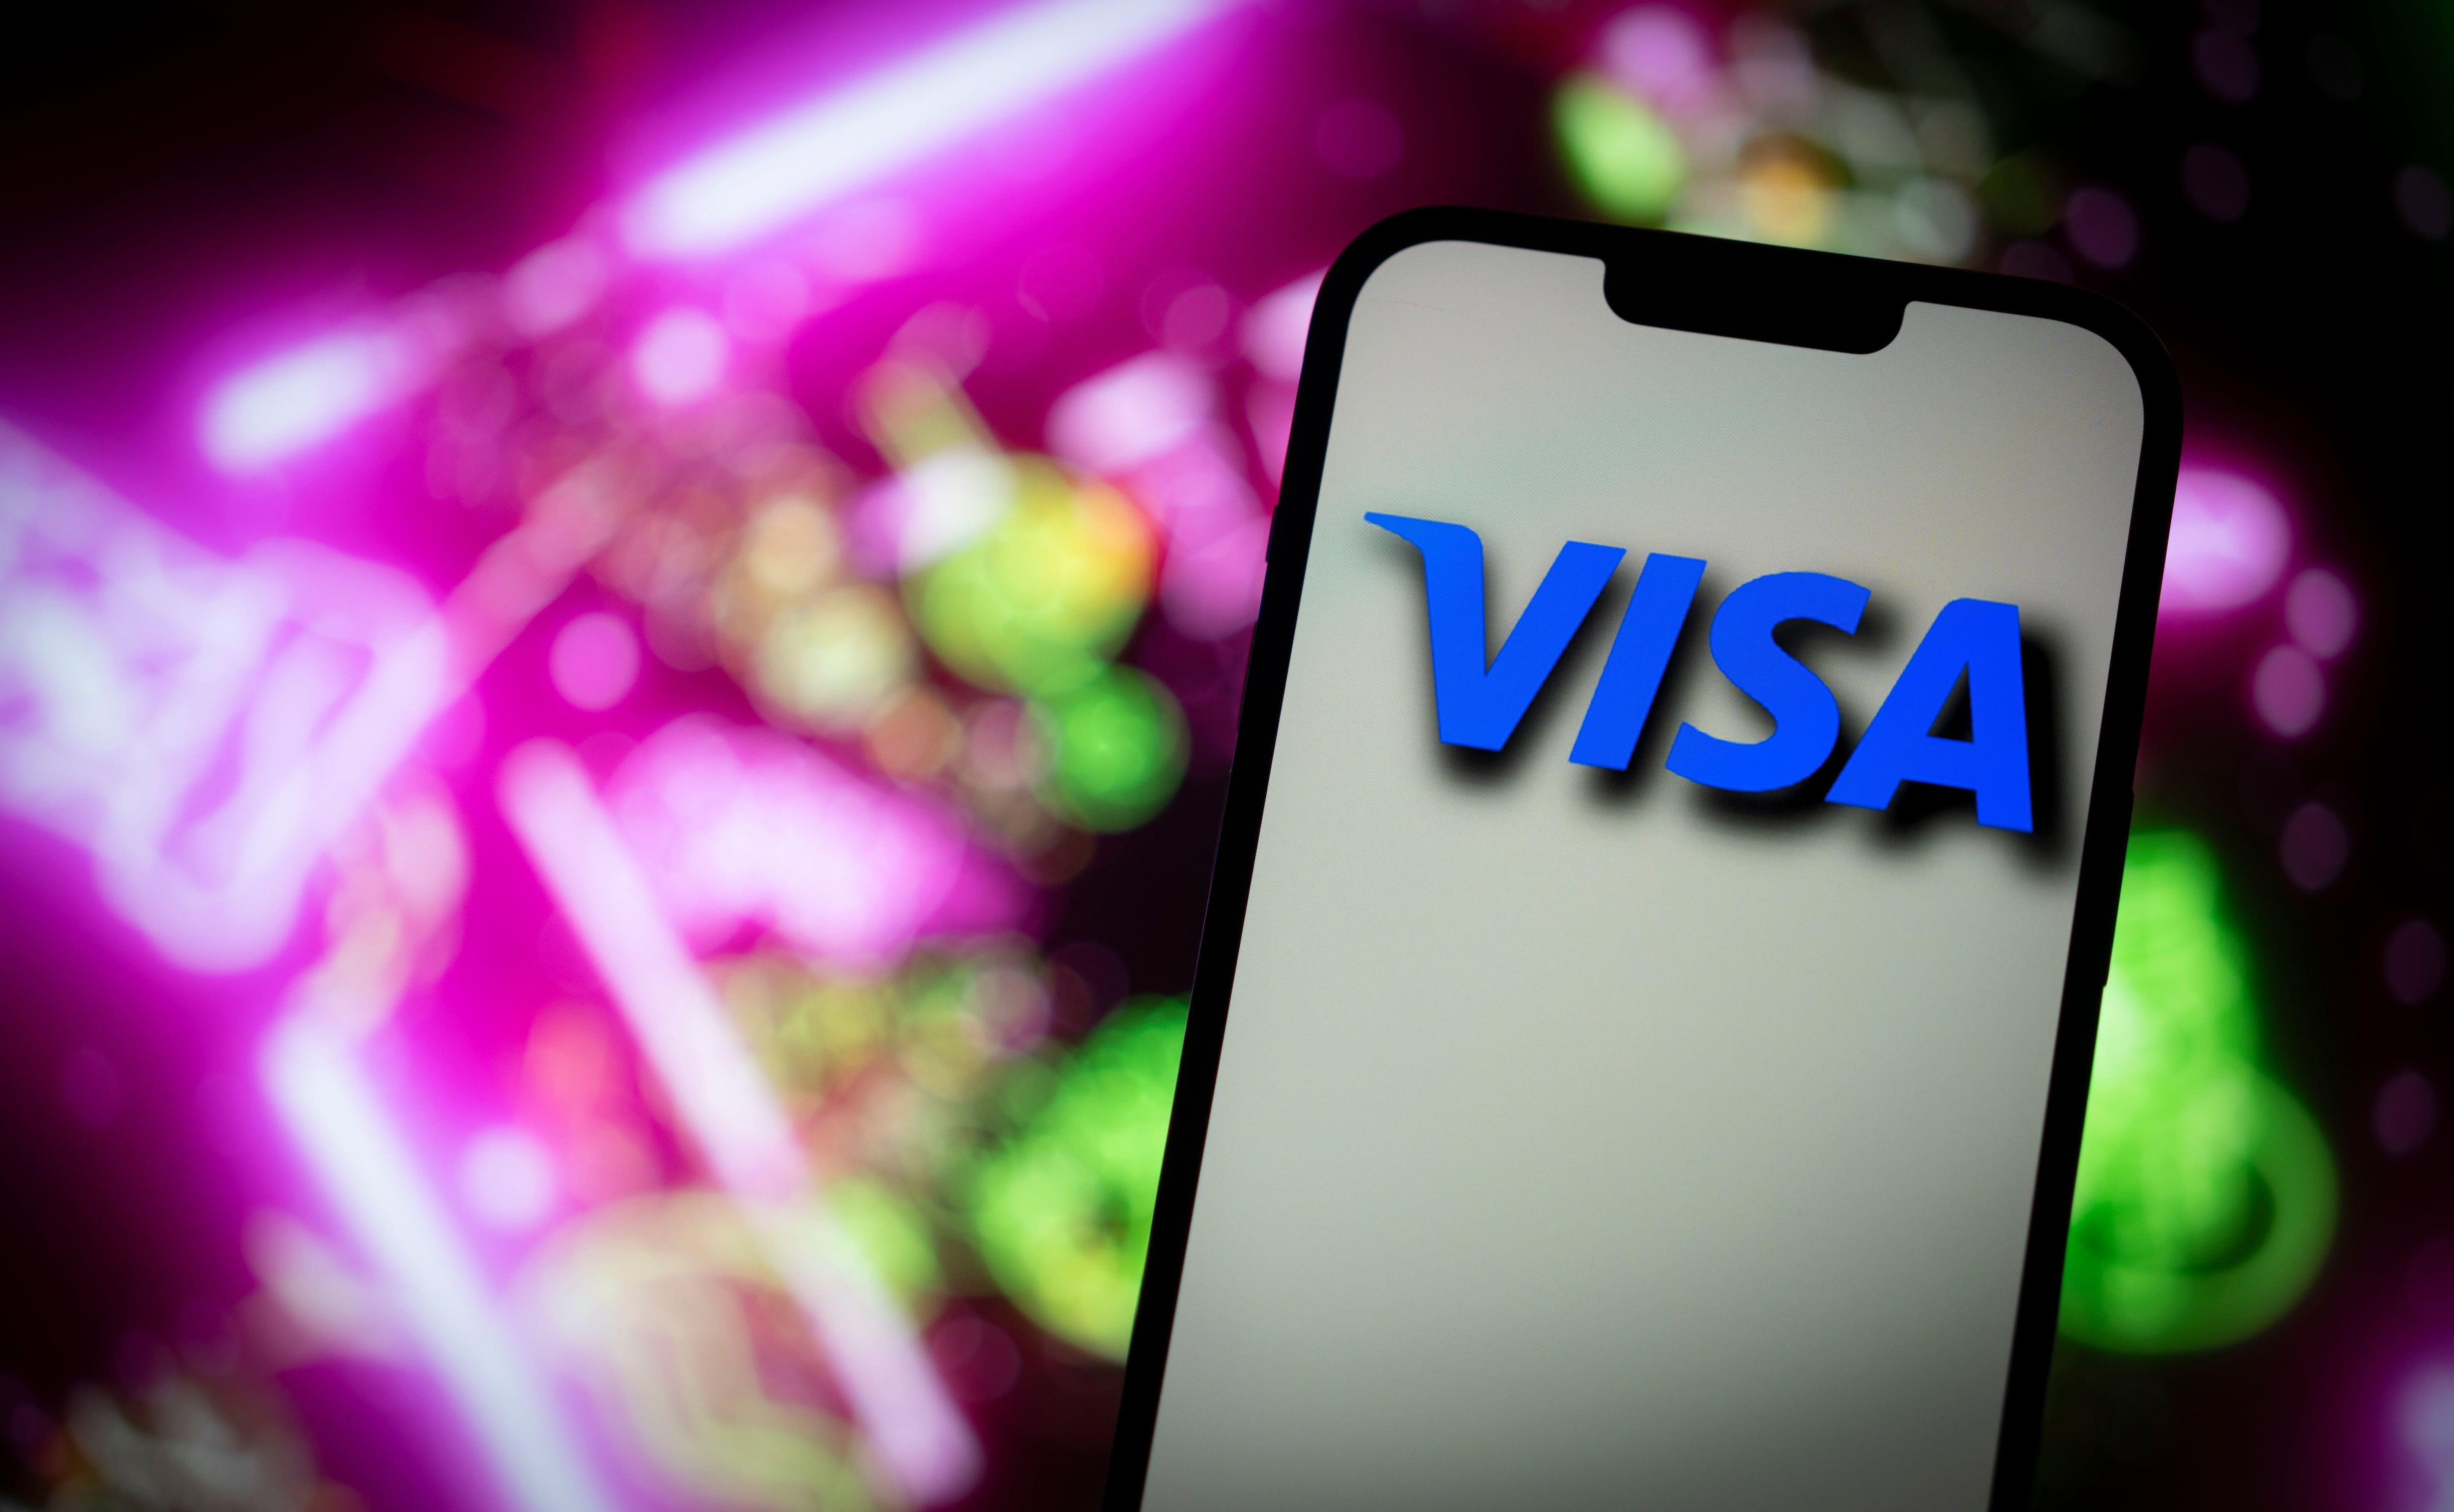 Tangem plans crypto Visa payment card with hardware wallet